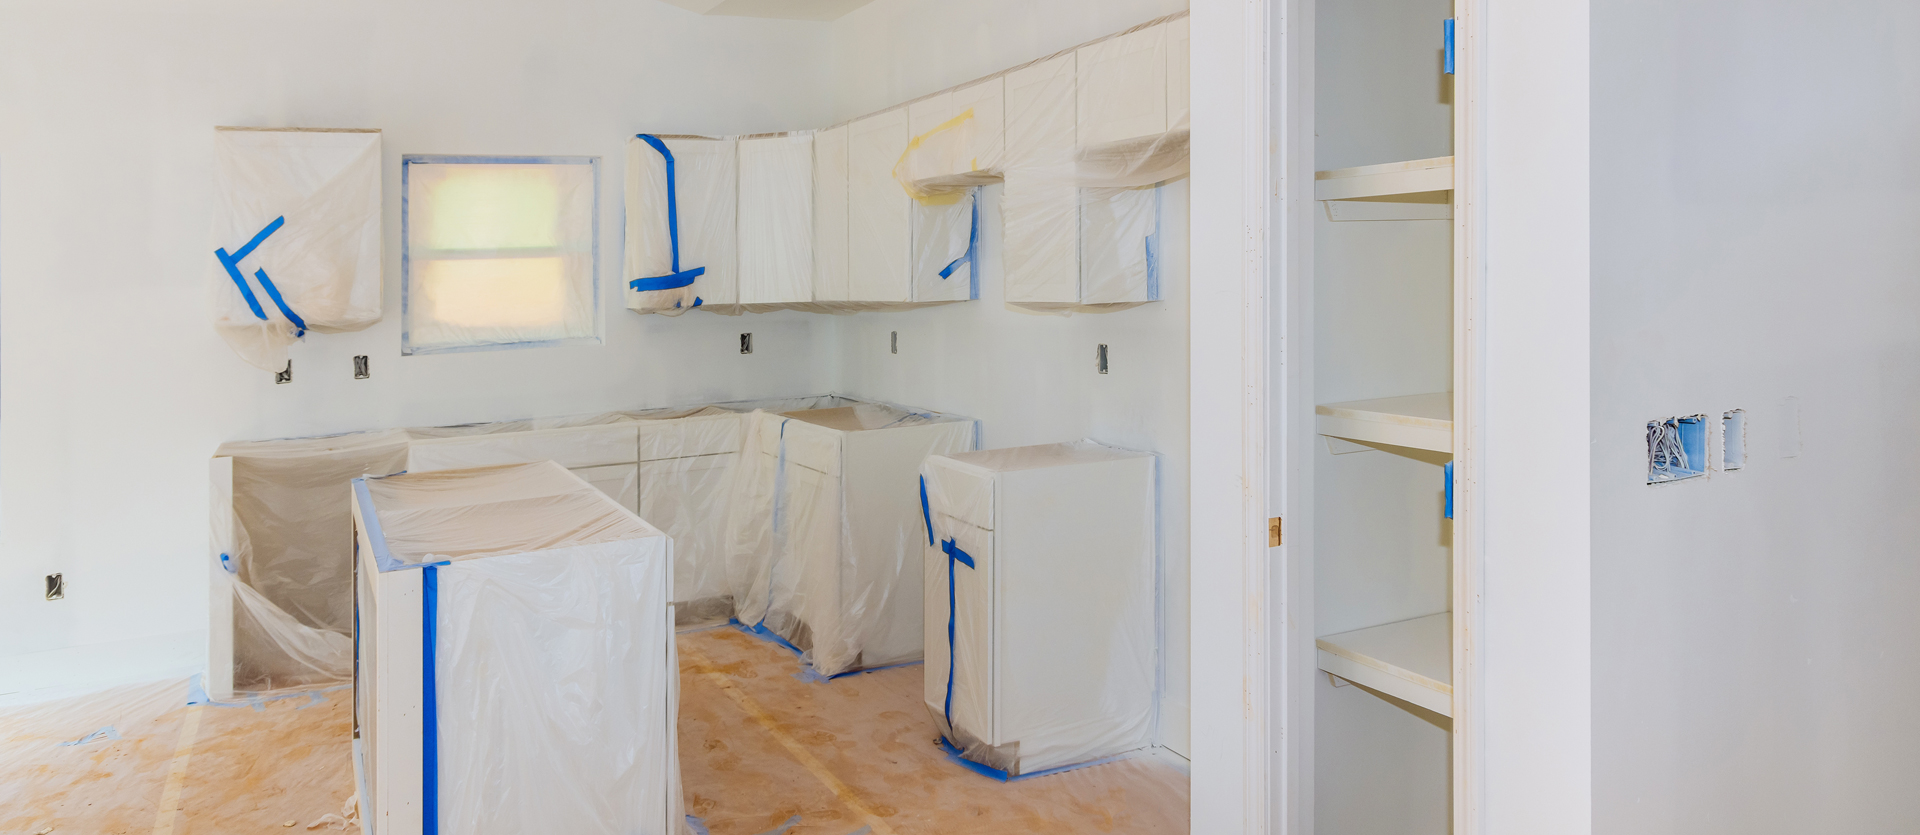 cabinets painting